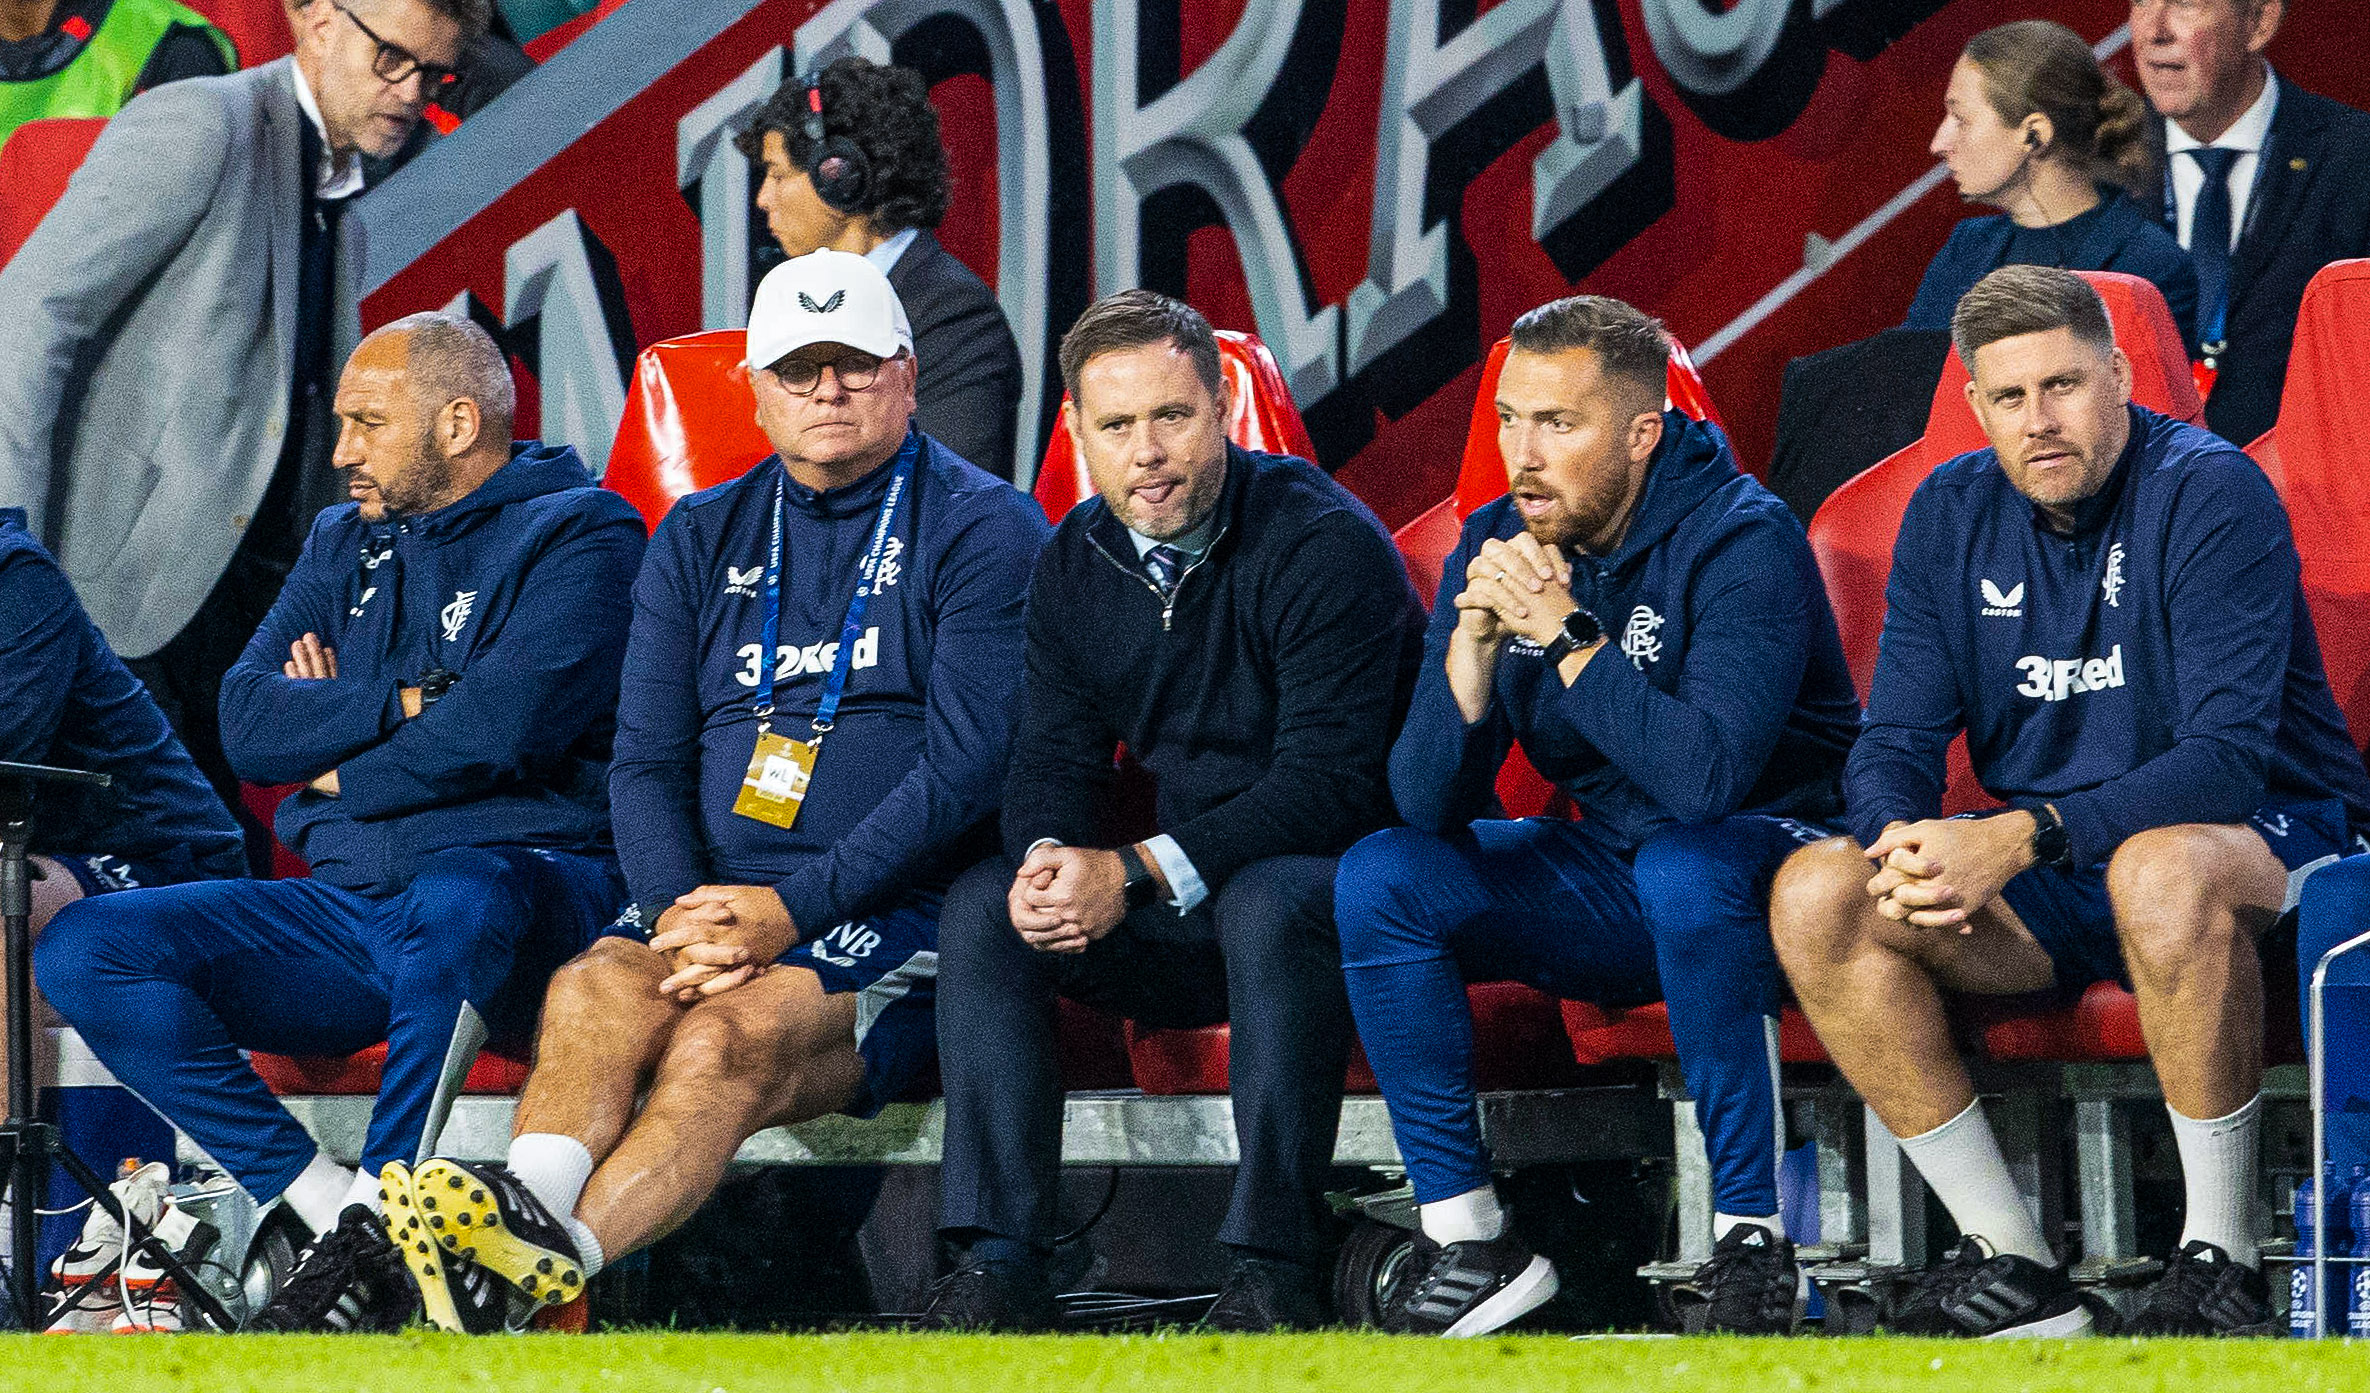 Rangers manager Michael Beale looks dejected during a UEFA Champions League Play-Off second leg match between PSV Eindhoven and Rangers at the Phillips Stadion, on August 30, 2023.